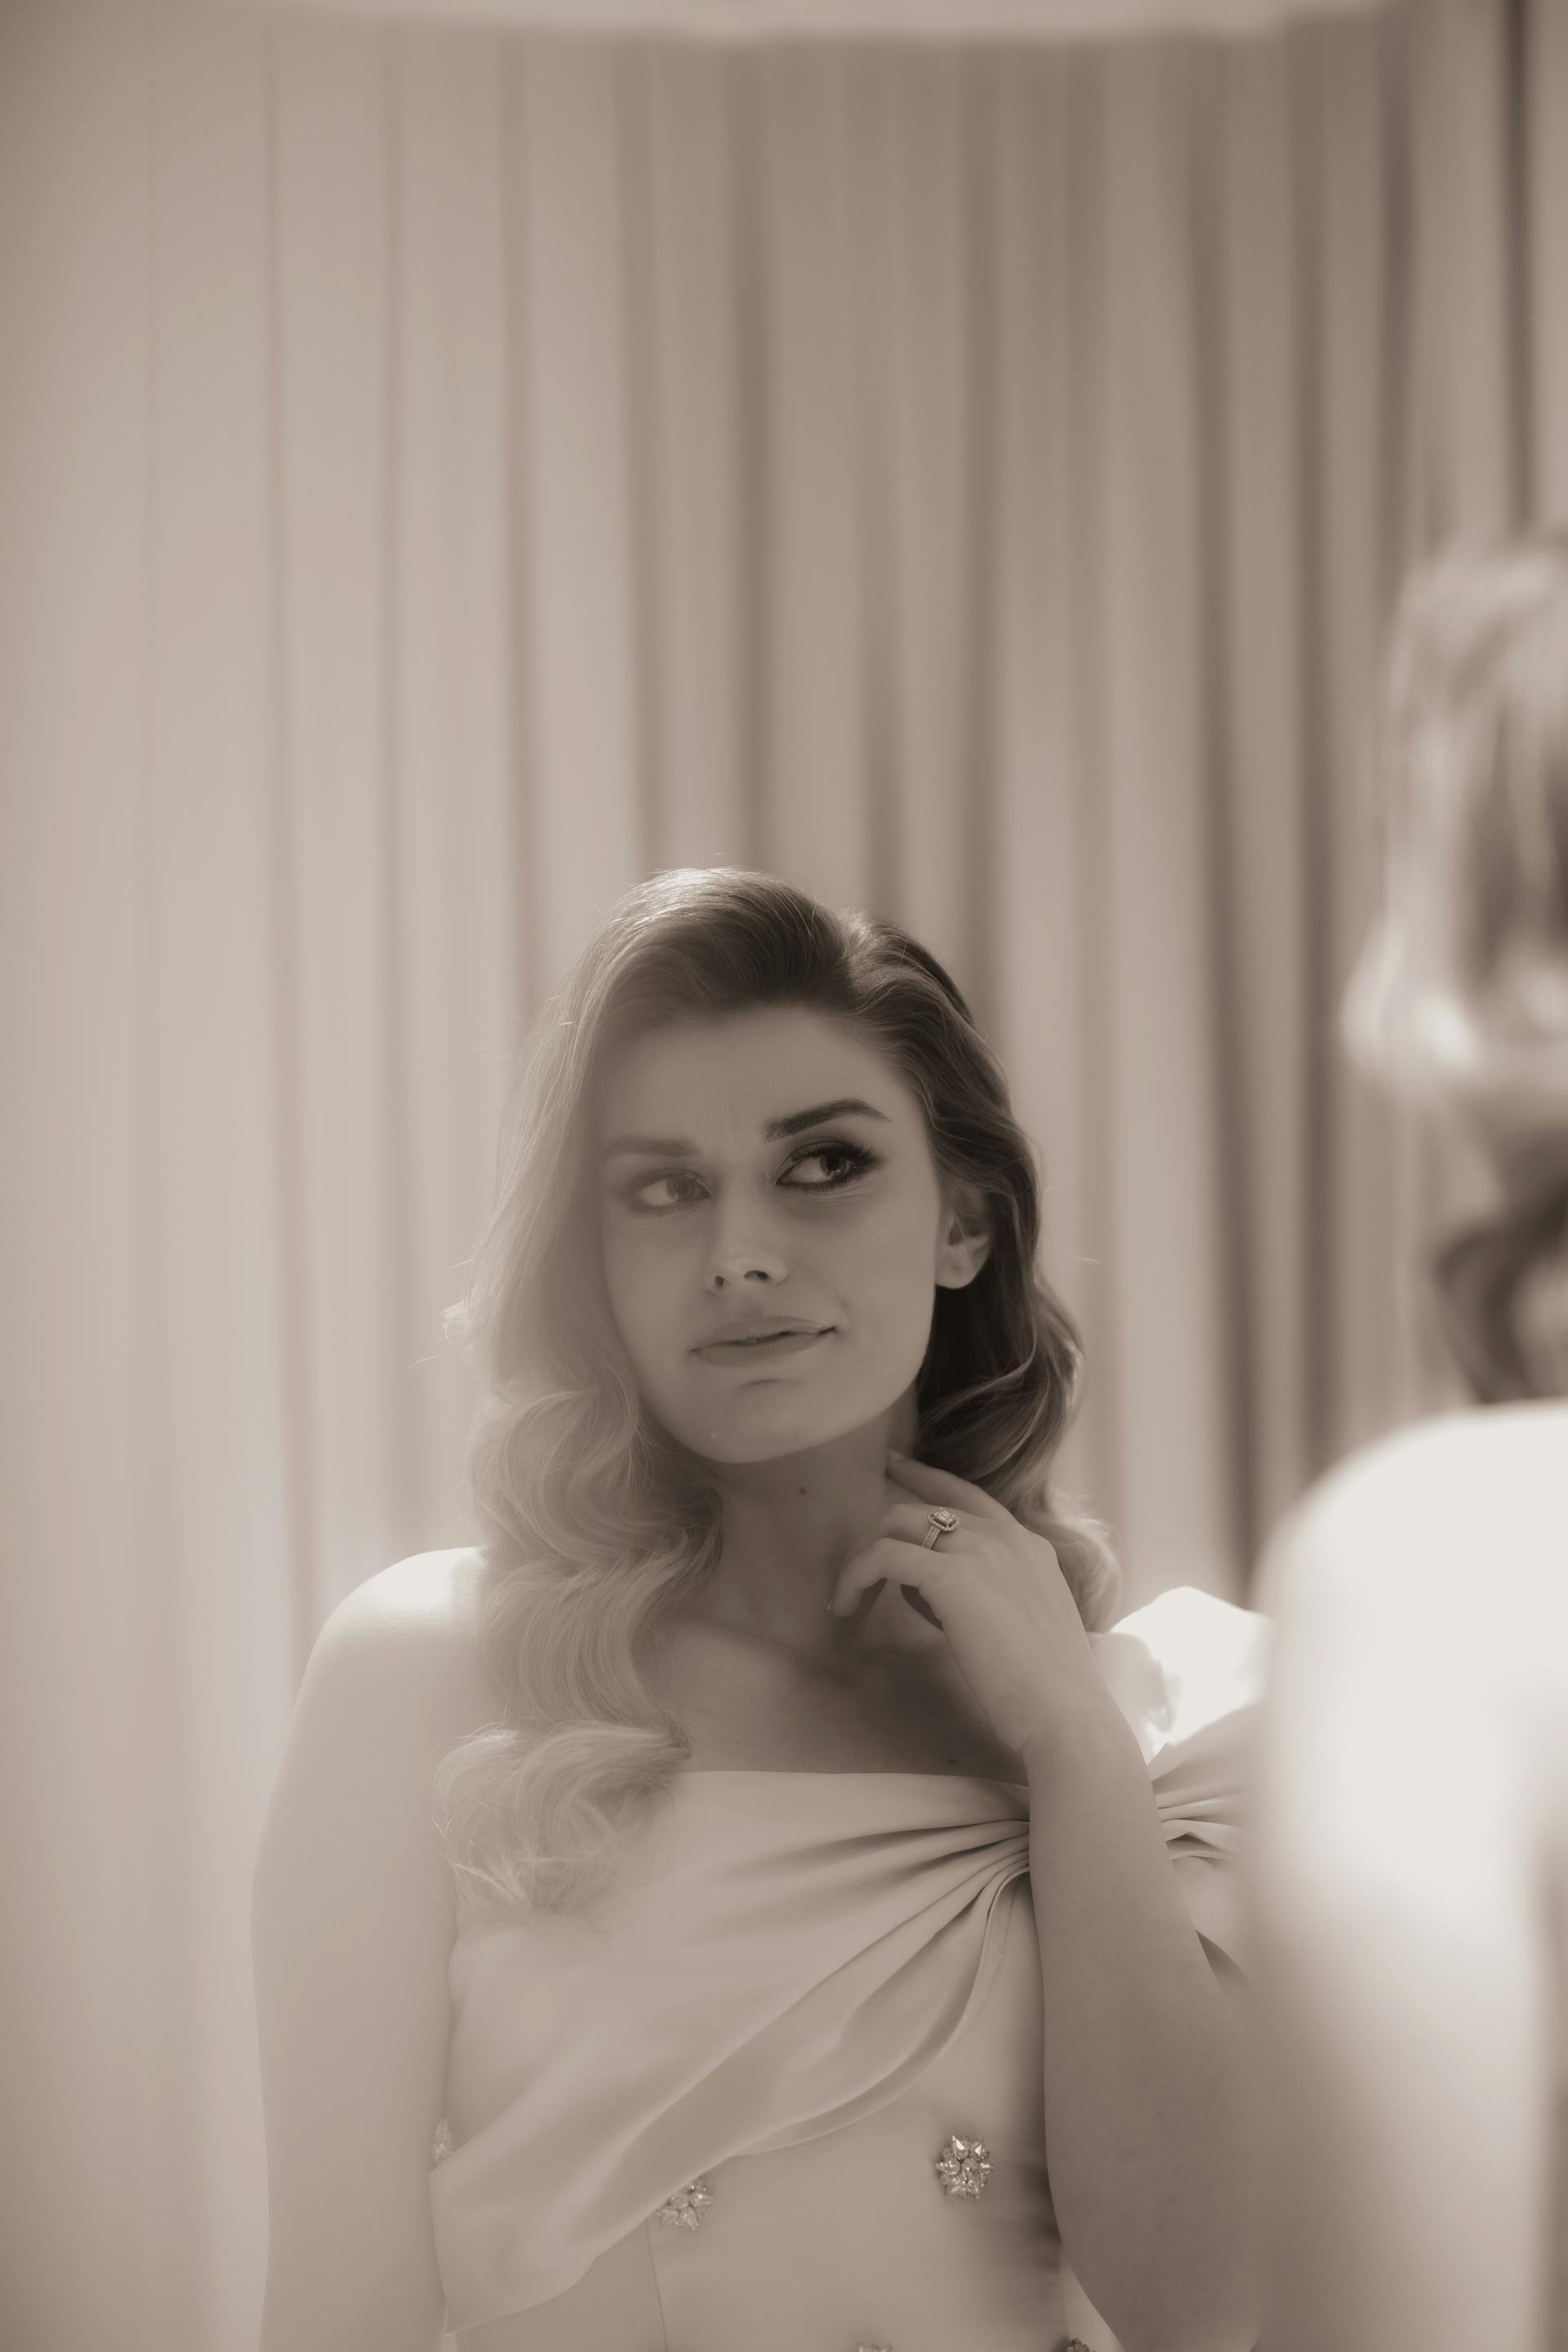 A grayscale photo of a bride looking in the mirror | Source: Pexels